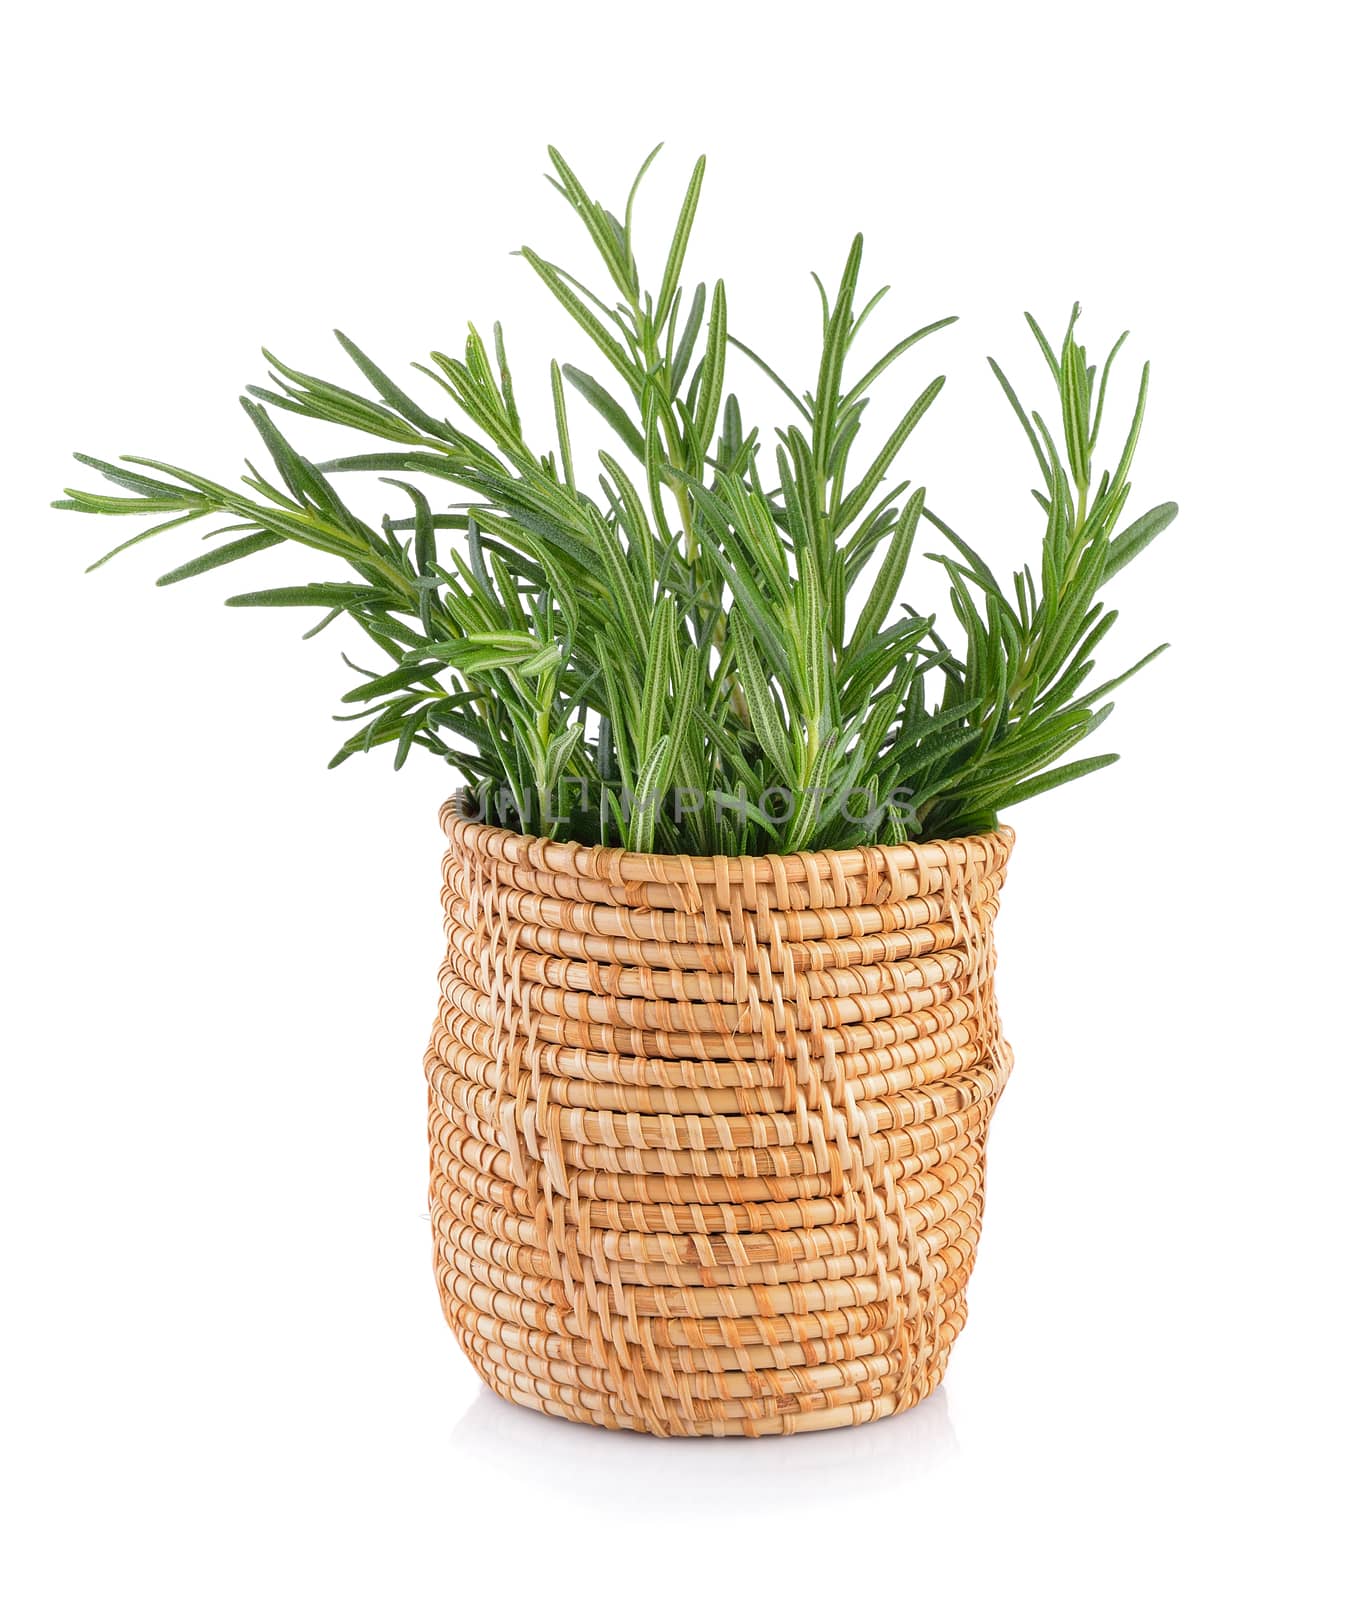 rosemary in basket on white background by sommai